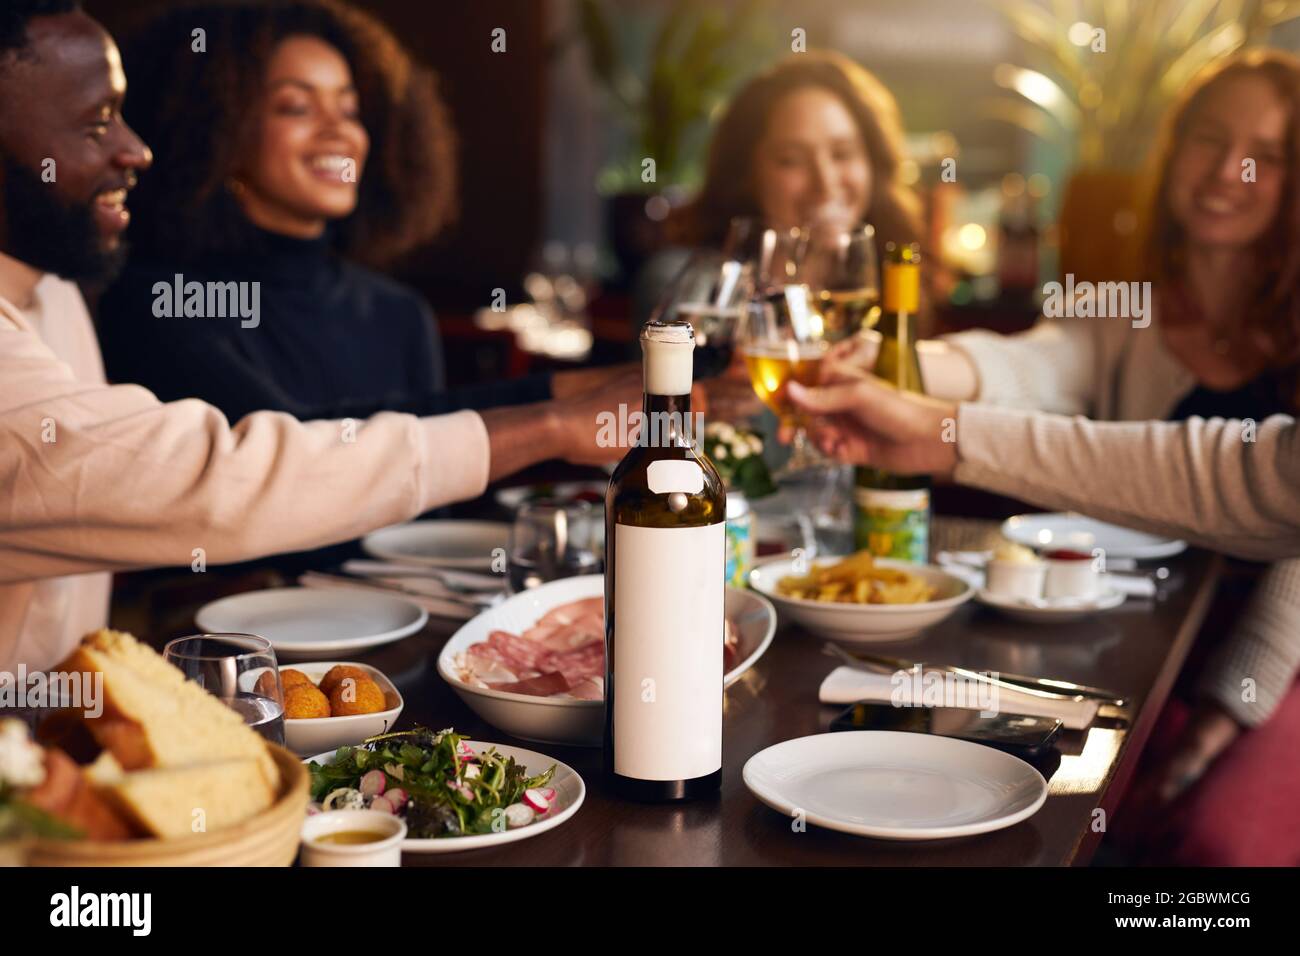 Friends toasting wine glasses at dinner Stock Photo